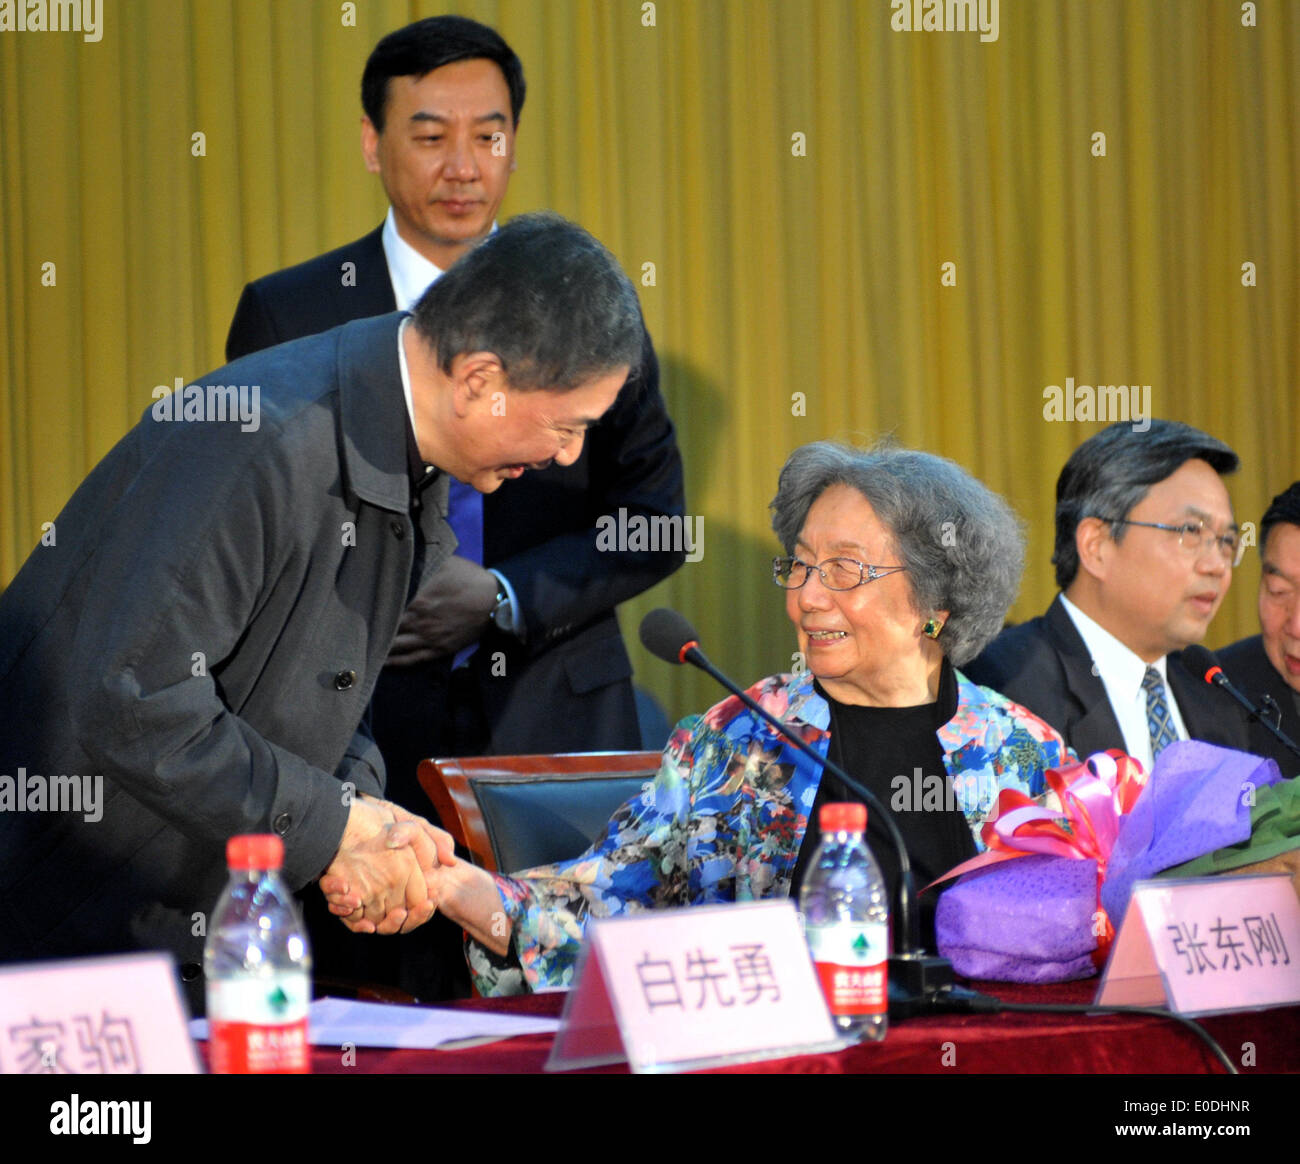 Tianjin, China. 10th May, 2014. Ye Jiaying (R), famous scholar of Chinese literature, shakes hand with writer Pai Hsien-yung during an event to mark Ye's 90th birthday at Nankai University in Tianjin, north China, May 10, 2014. Ye is a professor of classical Chinese literature and also a tenured faculty member at the University of British Columbia in Canada. Credit:  Zhang Chenlin/Xinhua/Alamy Live News Stock Photo